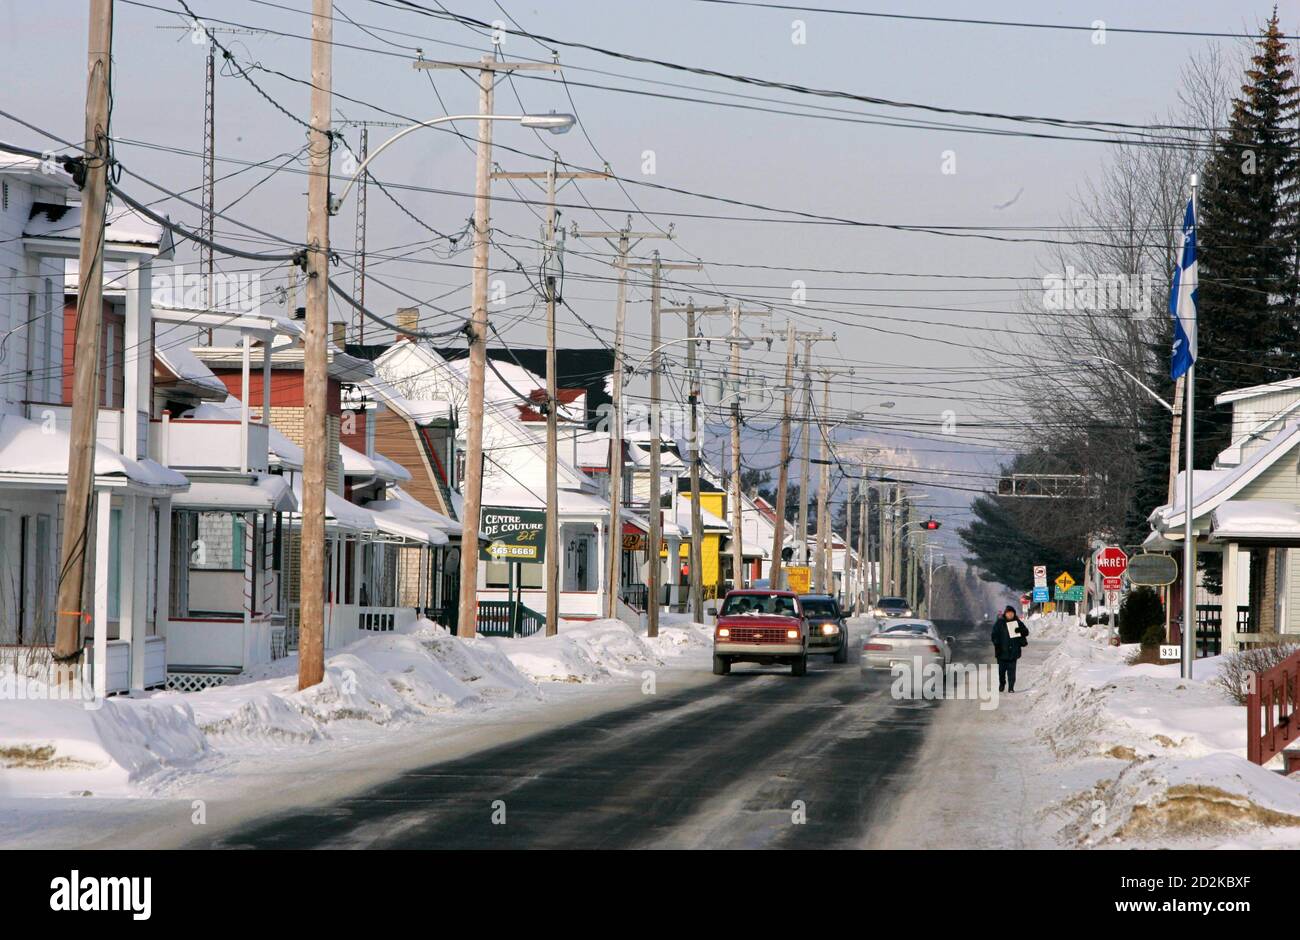 A general view of the Quebec town of Herouxville, February 11, 2007. A Muslim group of women met with the residents to voice their objection to the town council's recently passed code of social norms that new immigrants would have to adhere to.   REUTERS/Shaun Best        (CANADA) Stock Photo